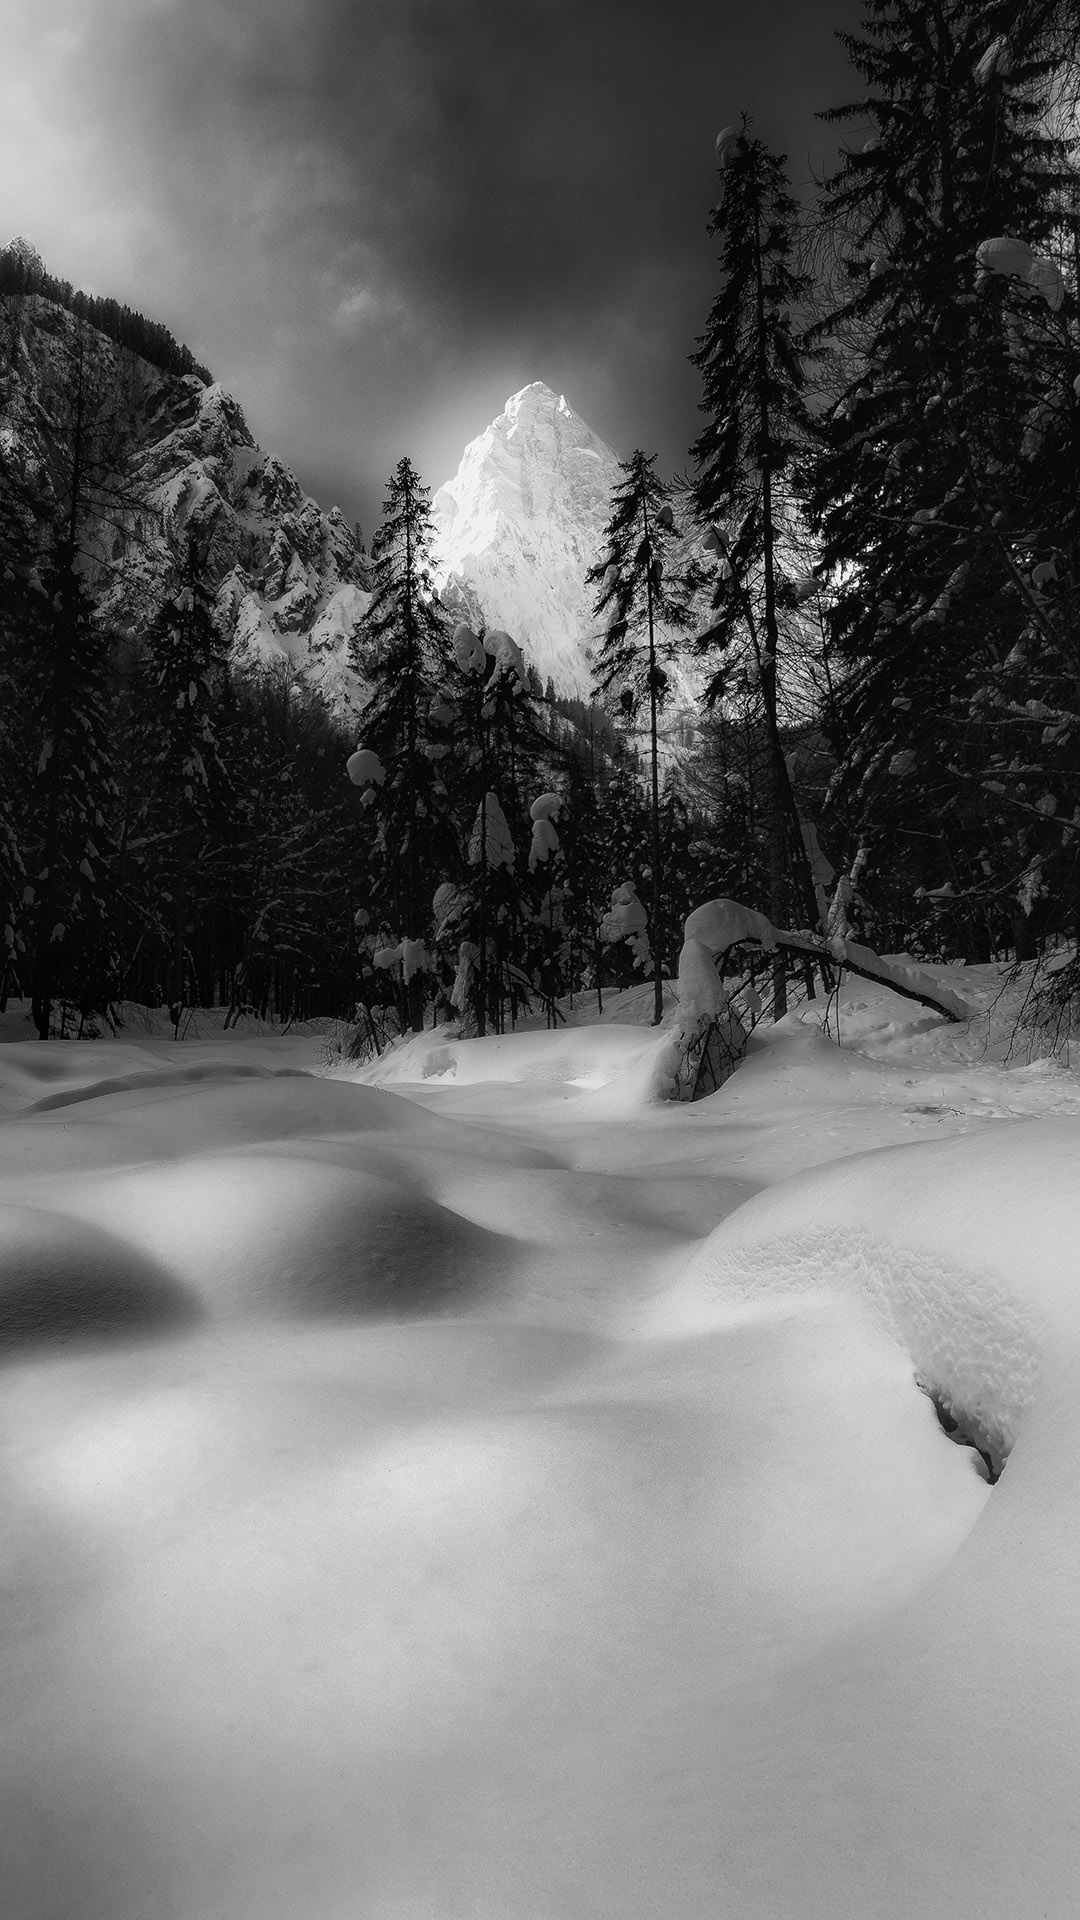 Dreamy Pixel. Free iPhone Wallpaper: Snowy landscape in black and white